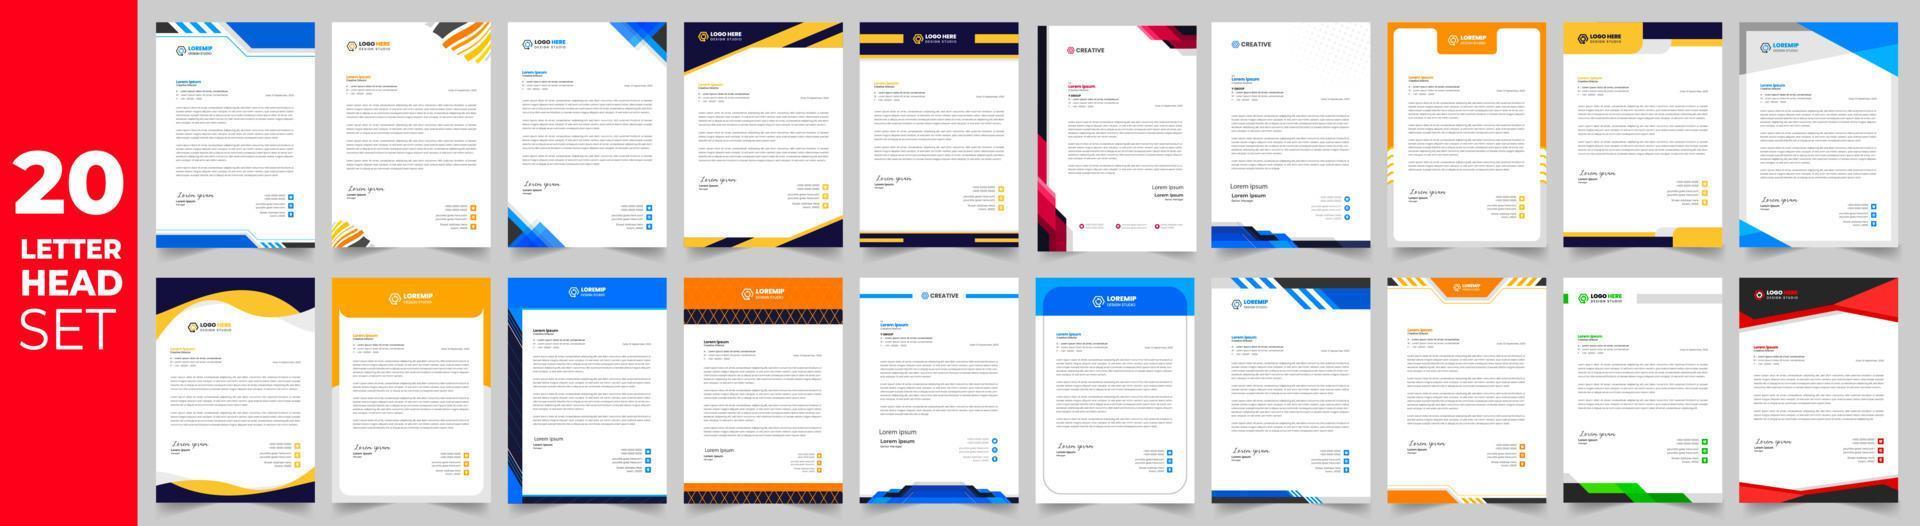 corporate modern letterhead design template set with yellow, blue, green and red color. creative modern letter head design bundle template for your project. letterhead, letter head. vector